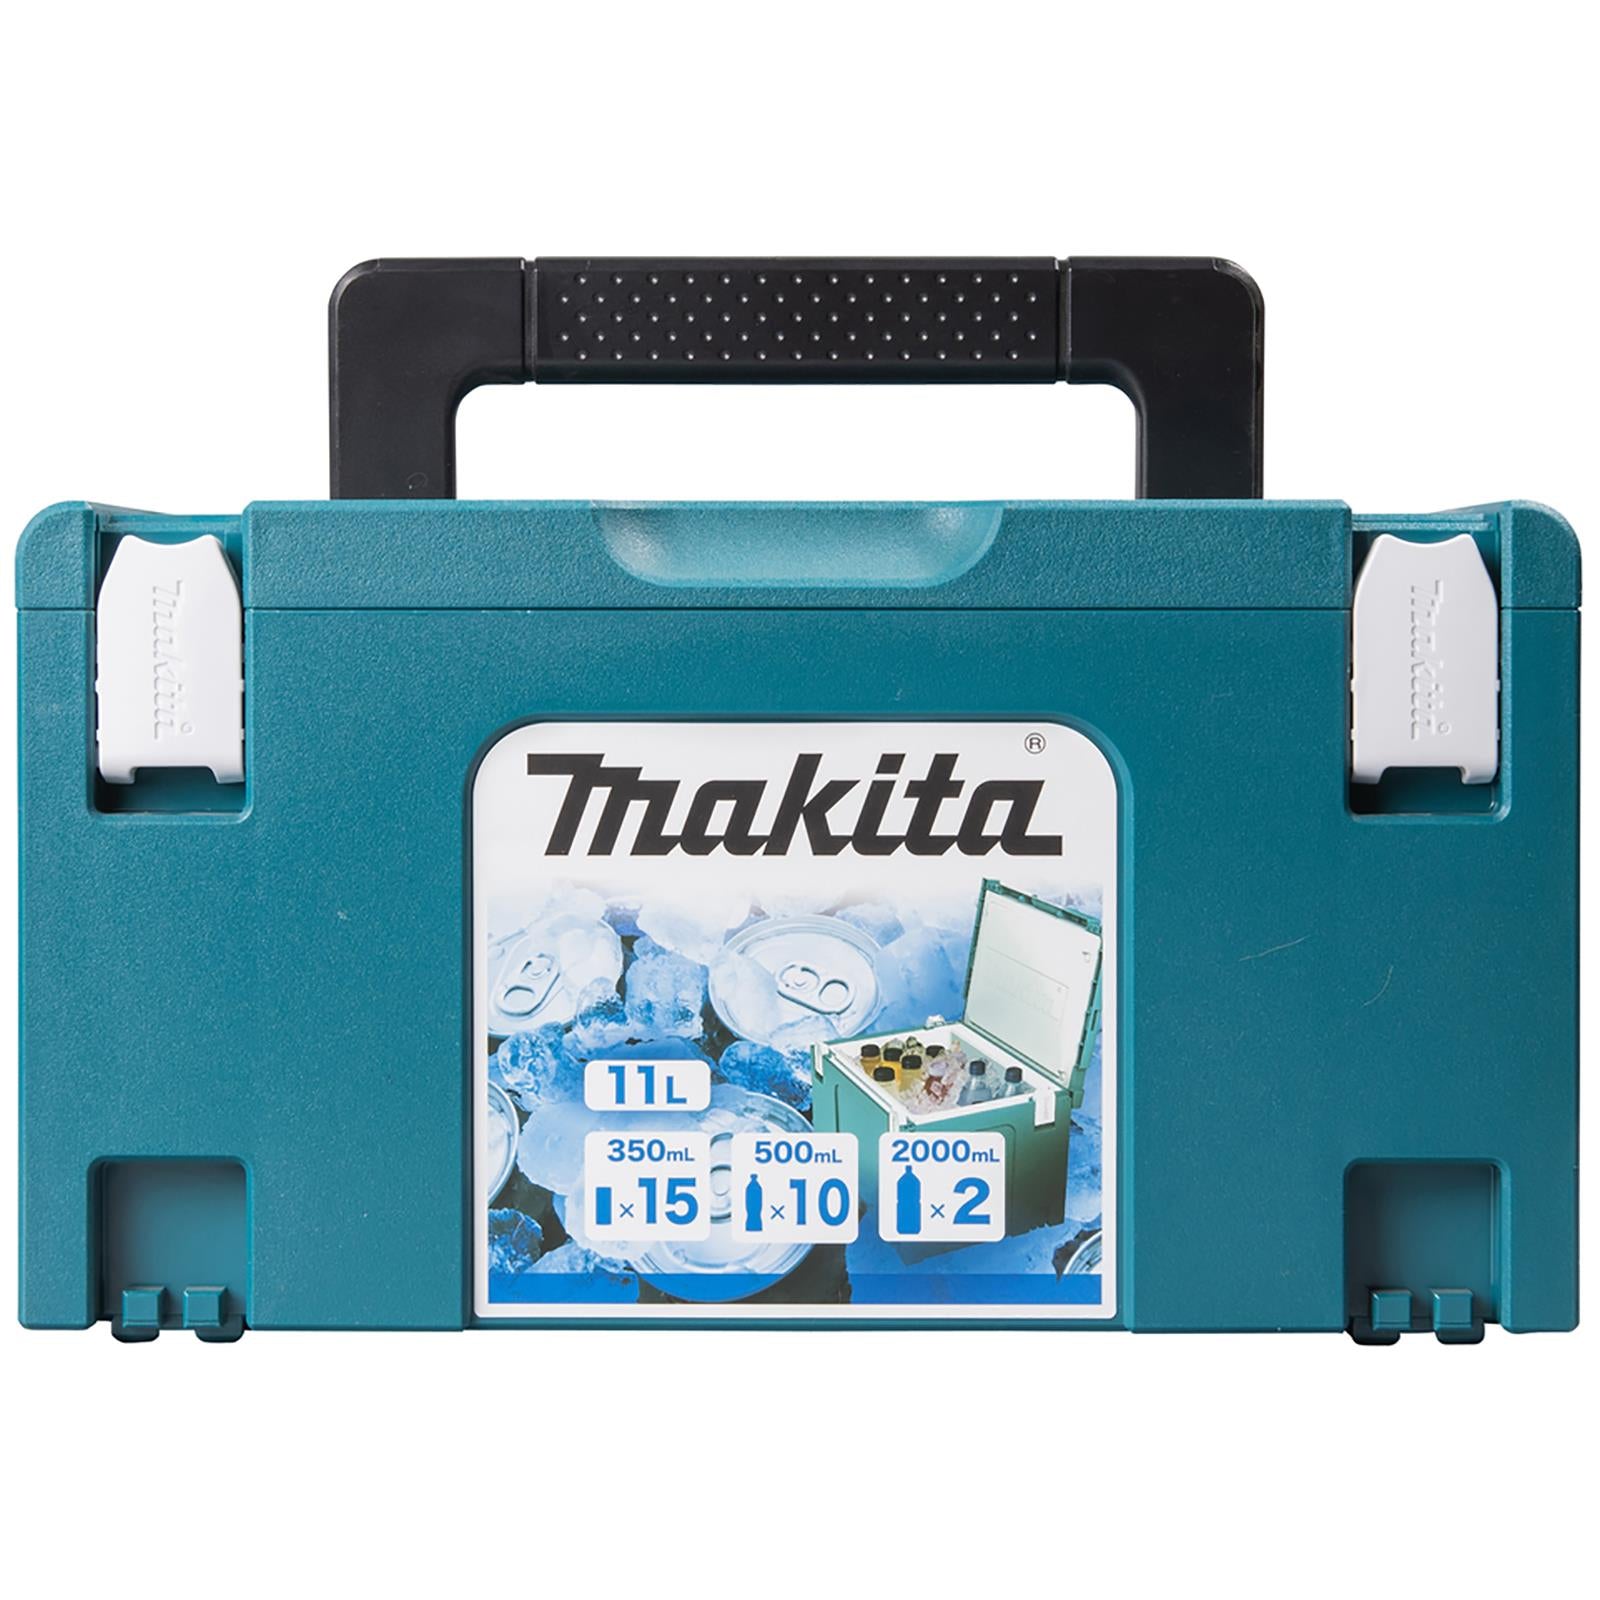 Makita Cool Box Makpac Connector Case Type 3 11 Litres 198254-2